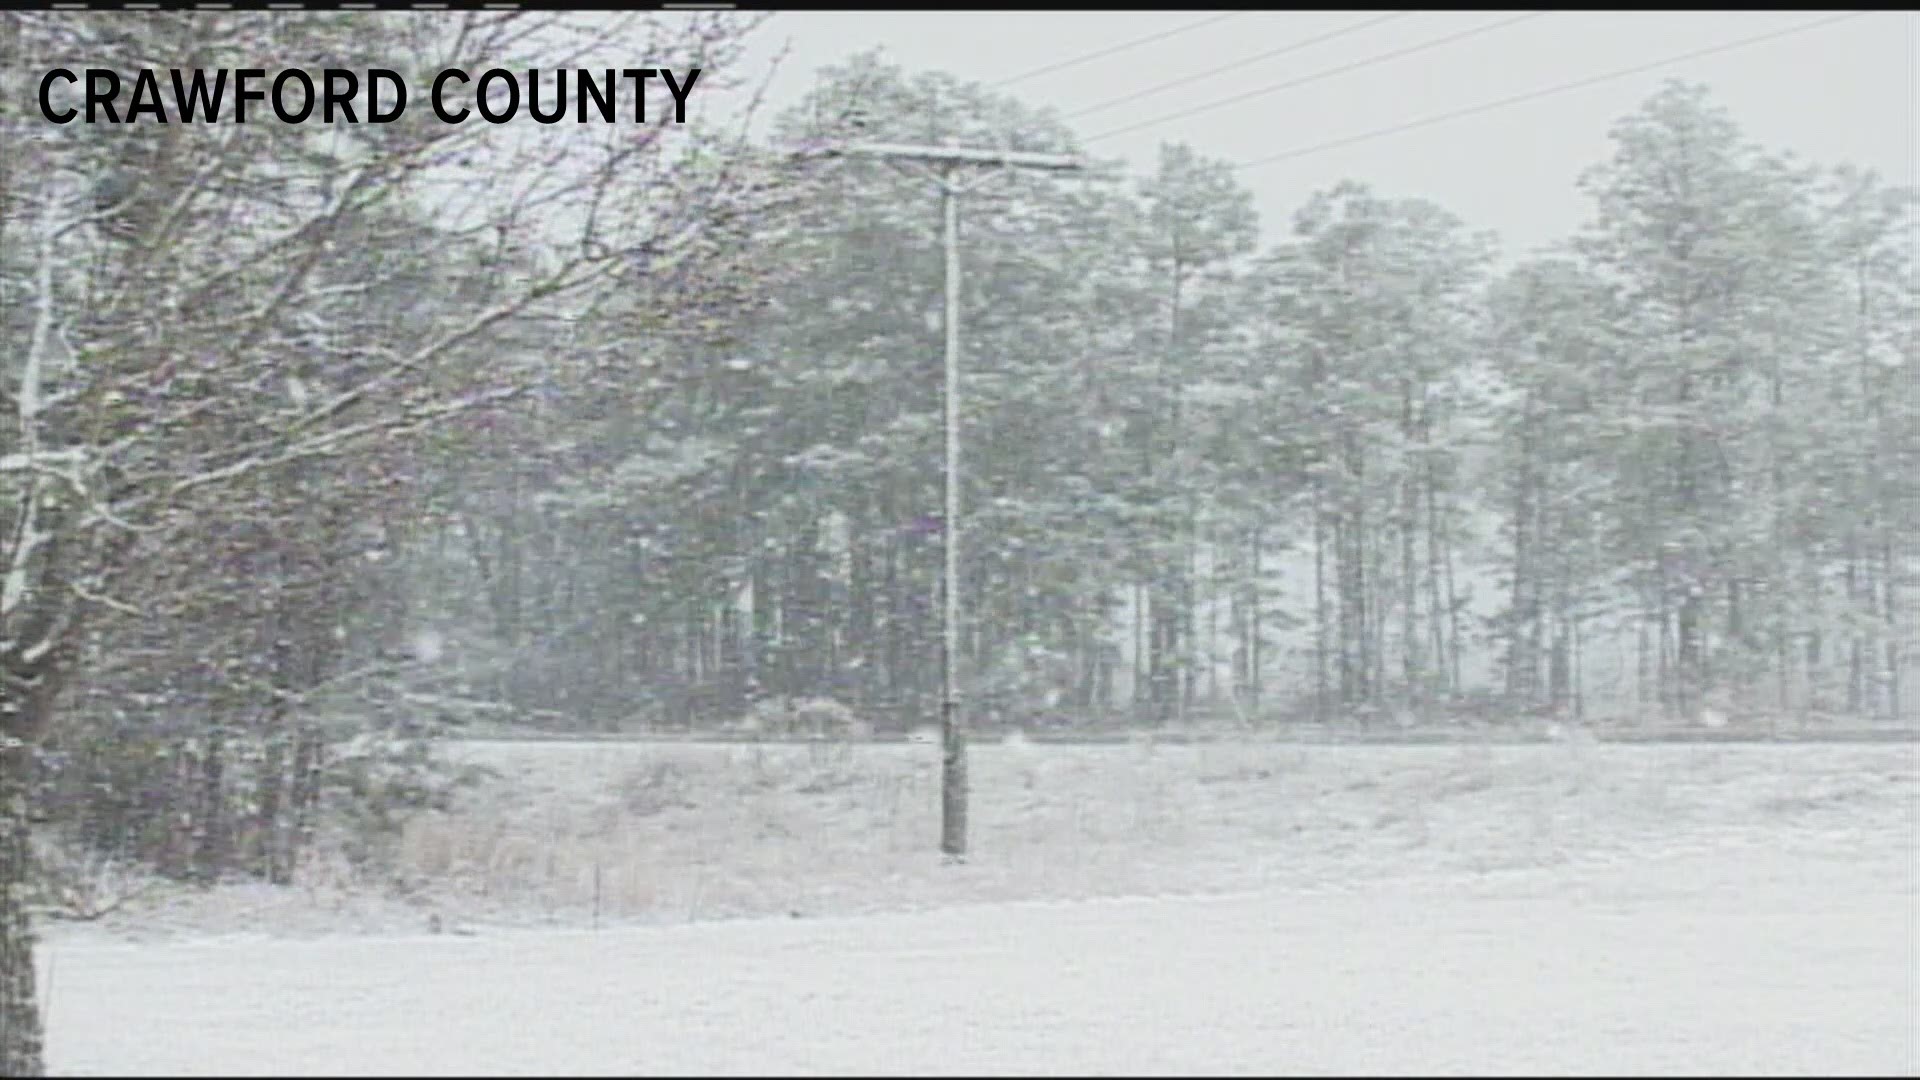 Almost a decade ago, Central Georgia counties saw a little bit of snow in February 2010. Here's what that looked like back then.